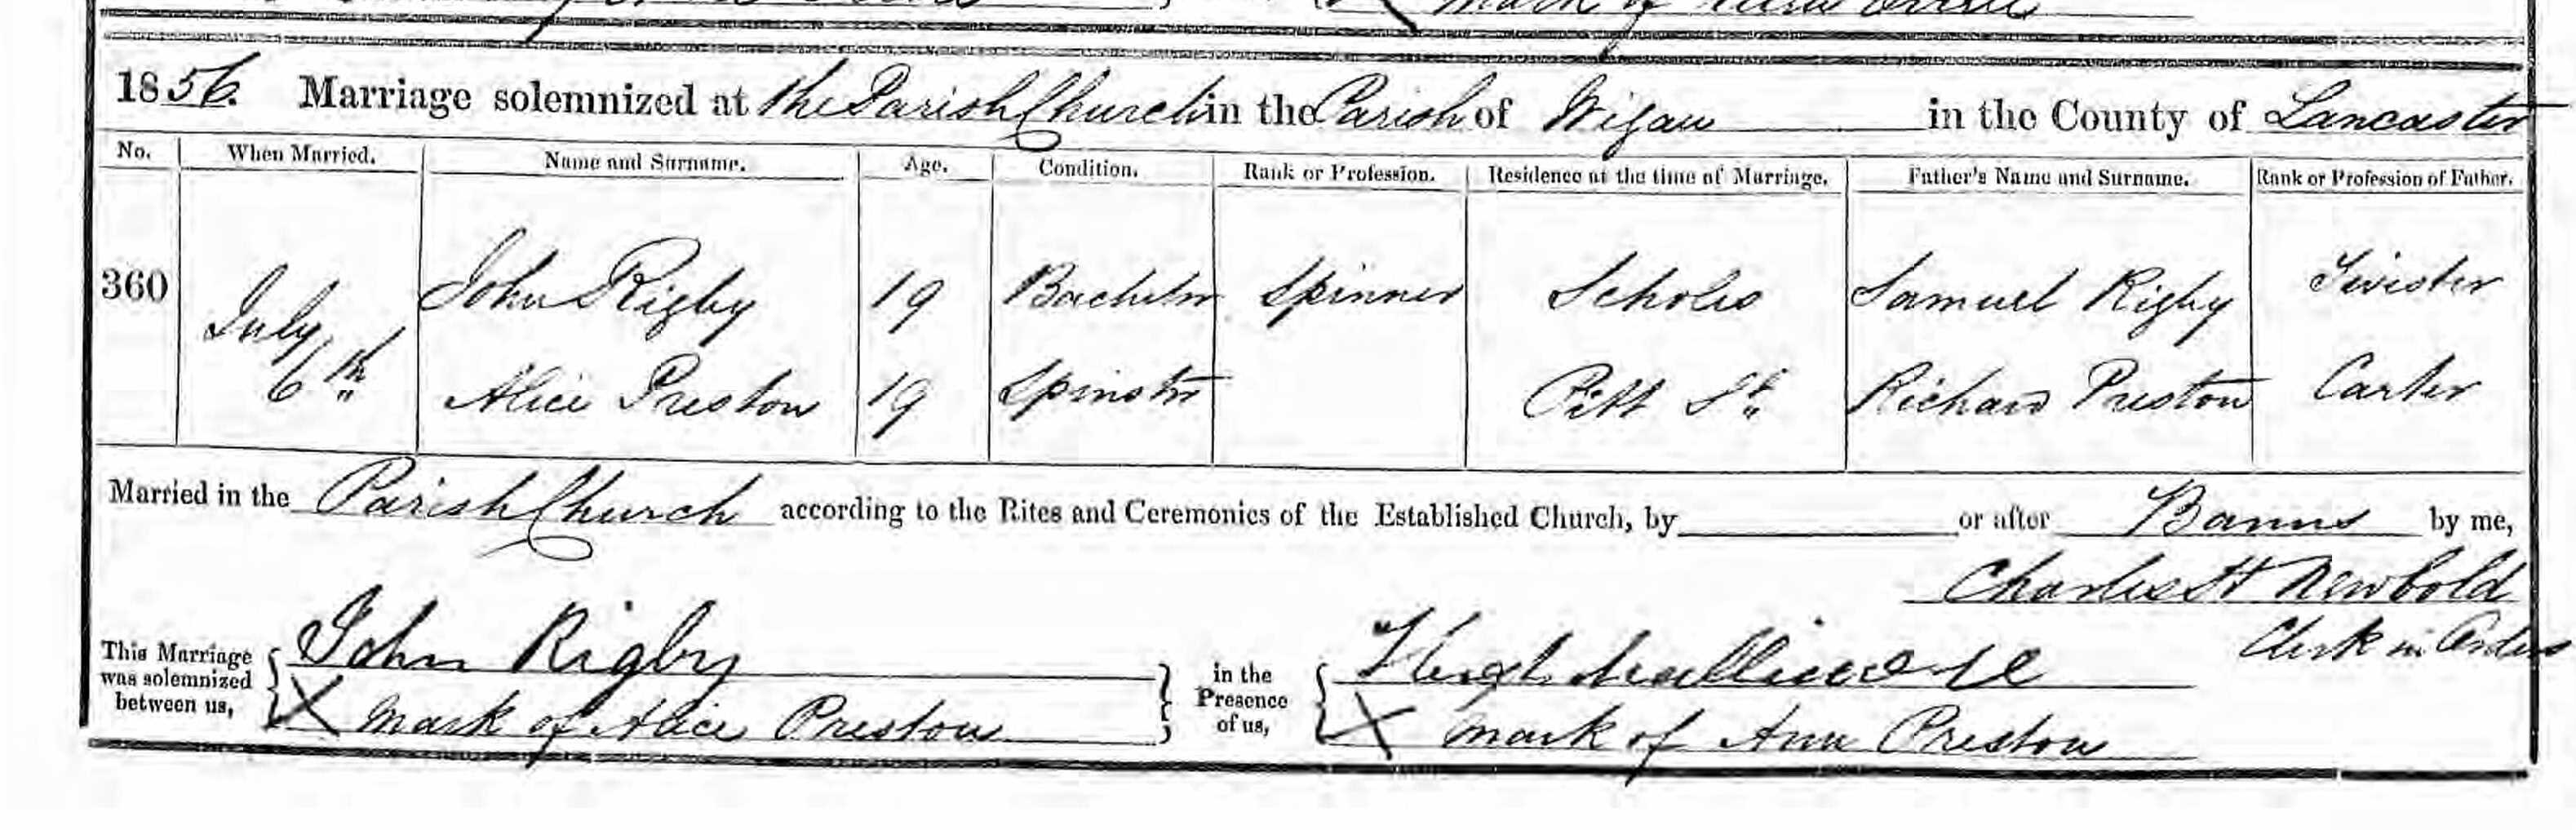 John and Alice's marriage